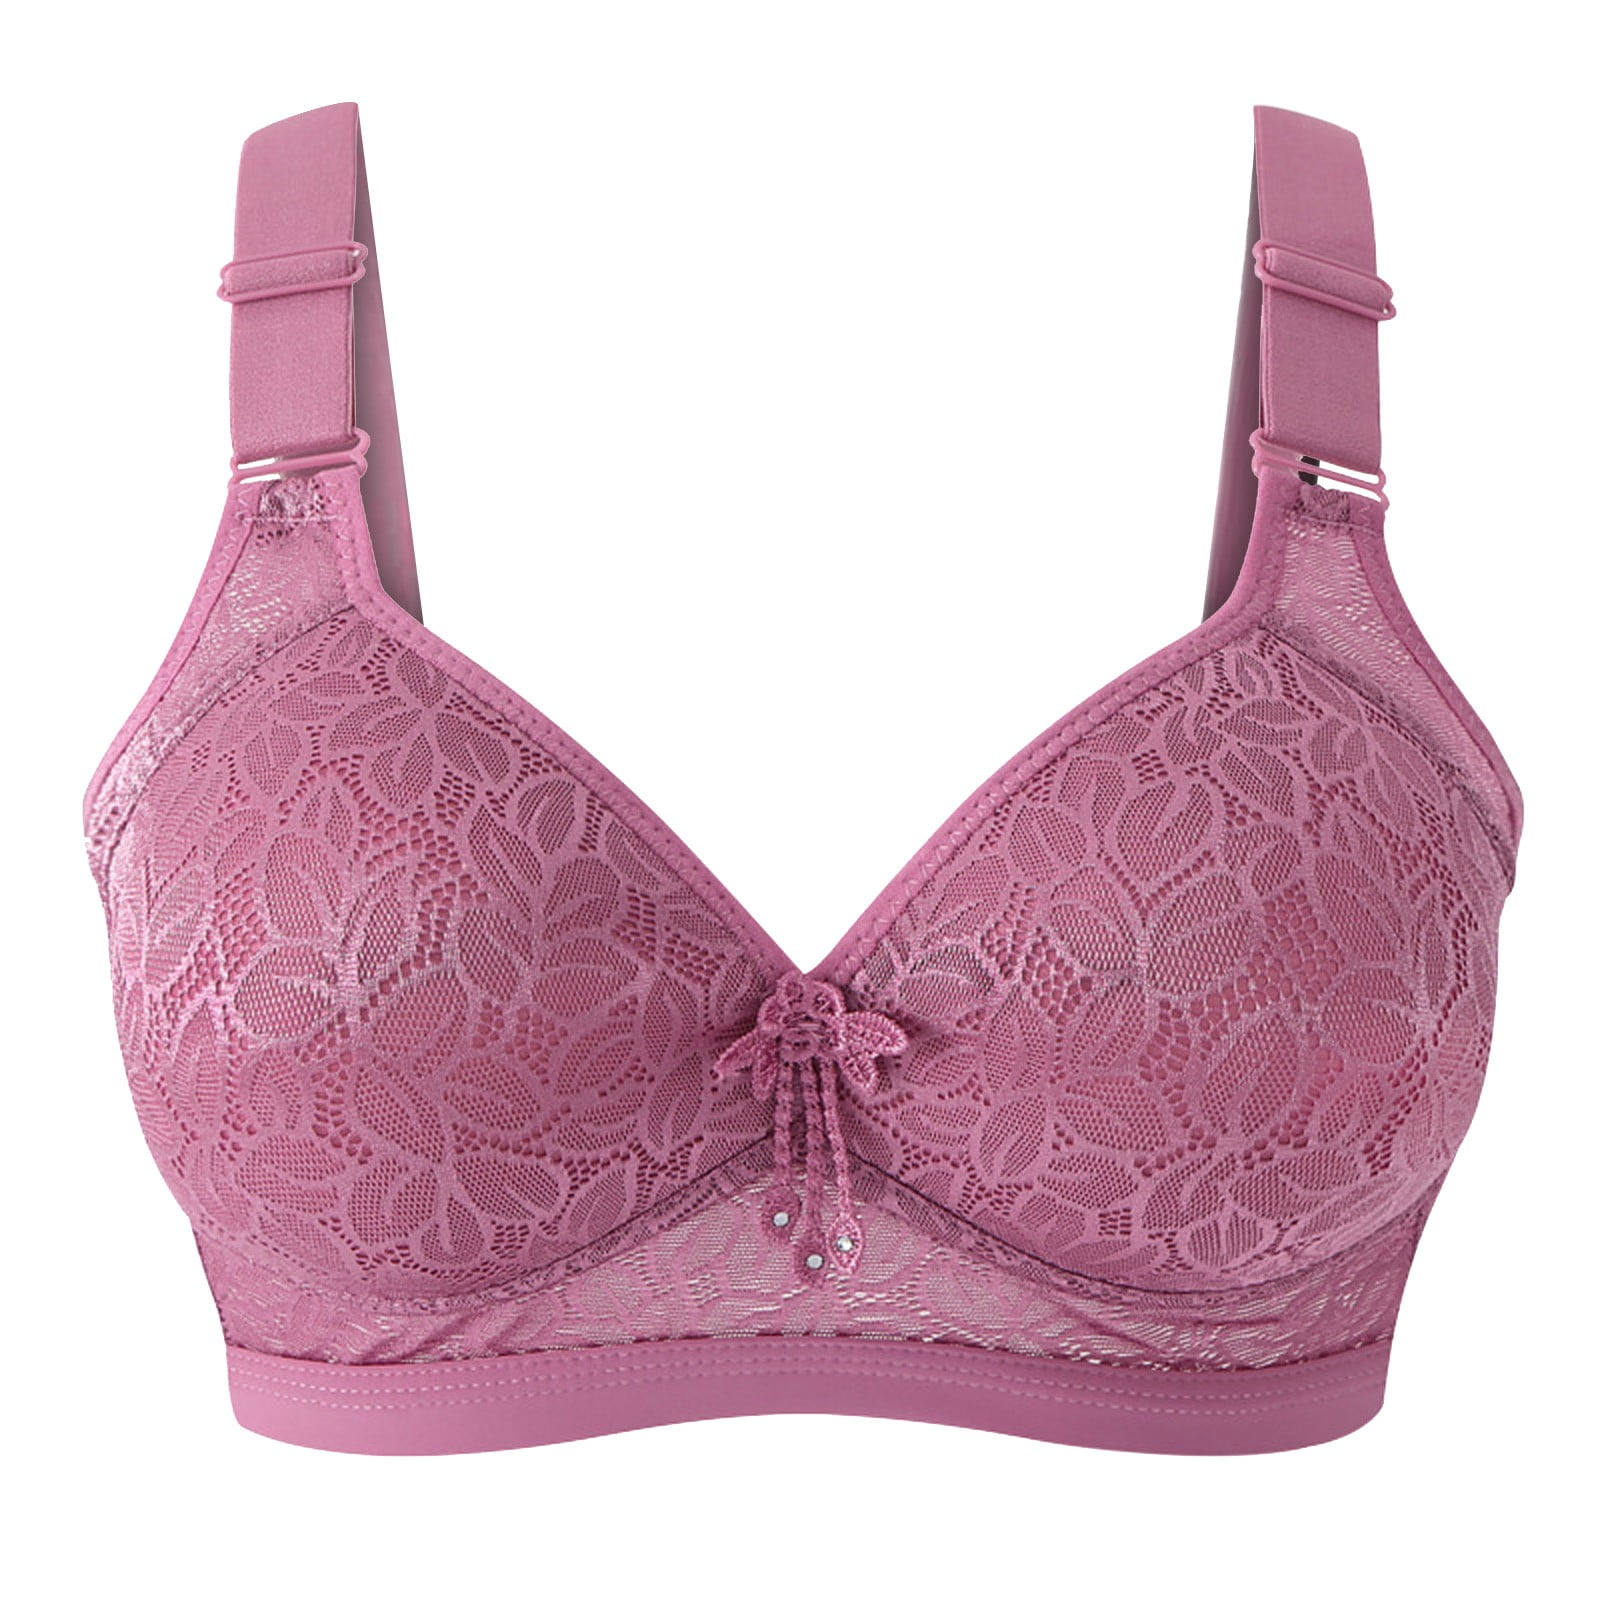 How To Use Bra Silicone Inserts - Front Room Underfashions